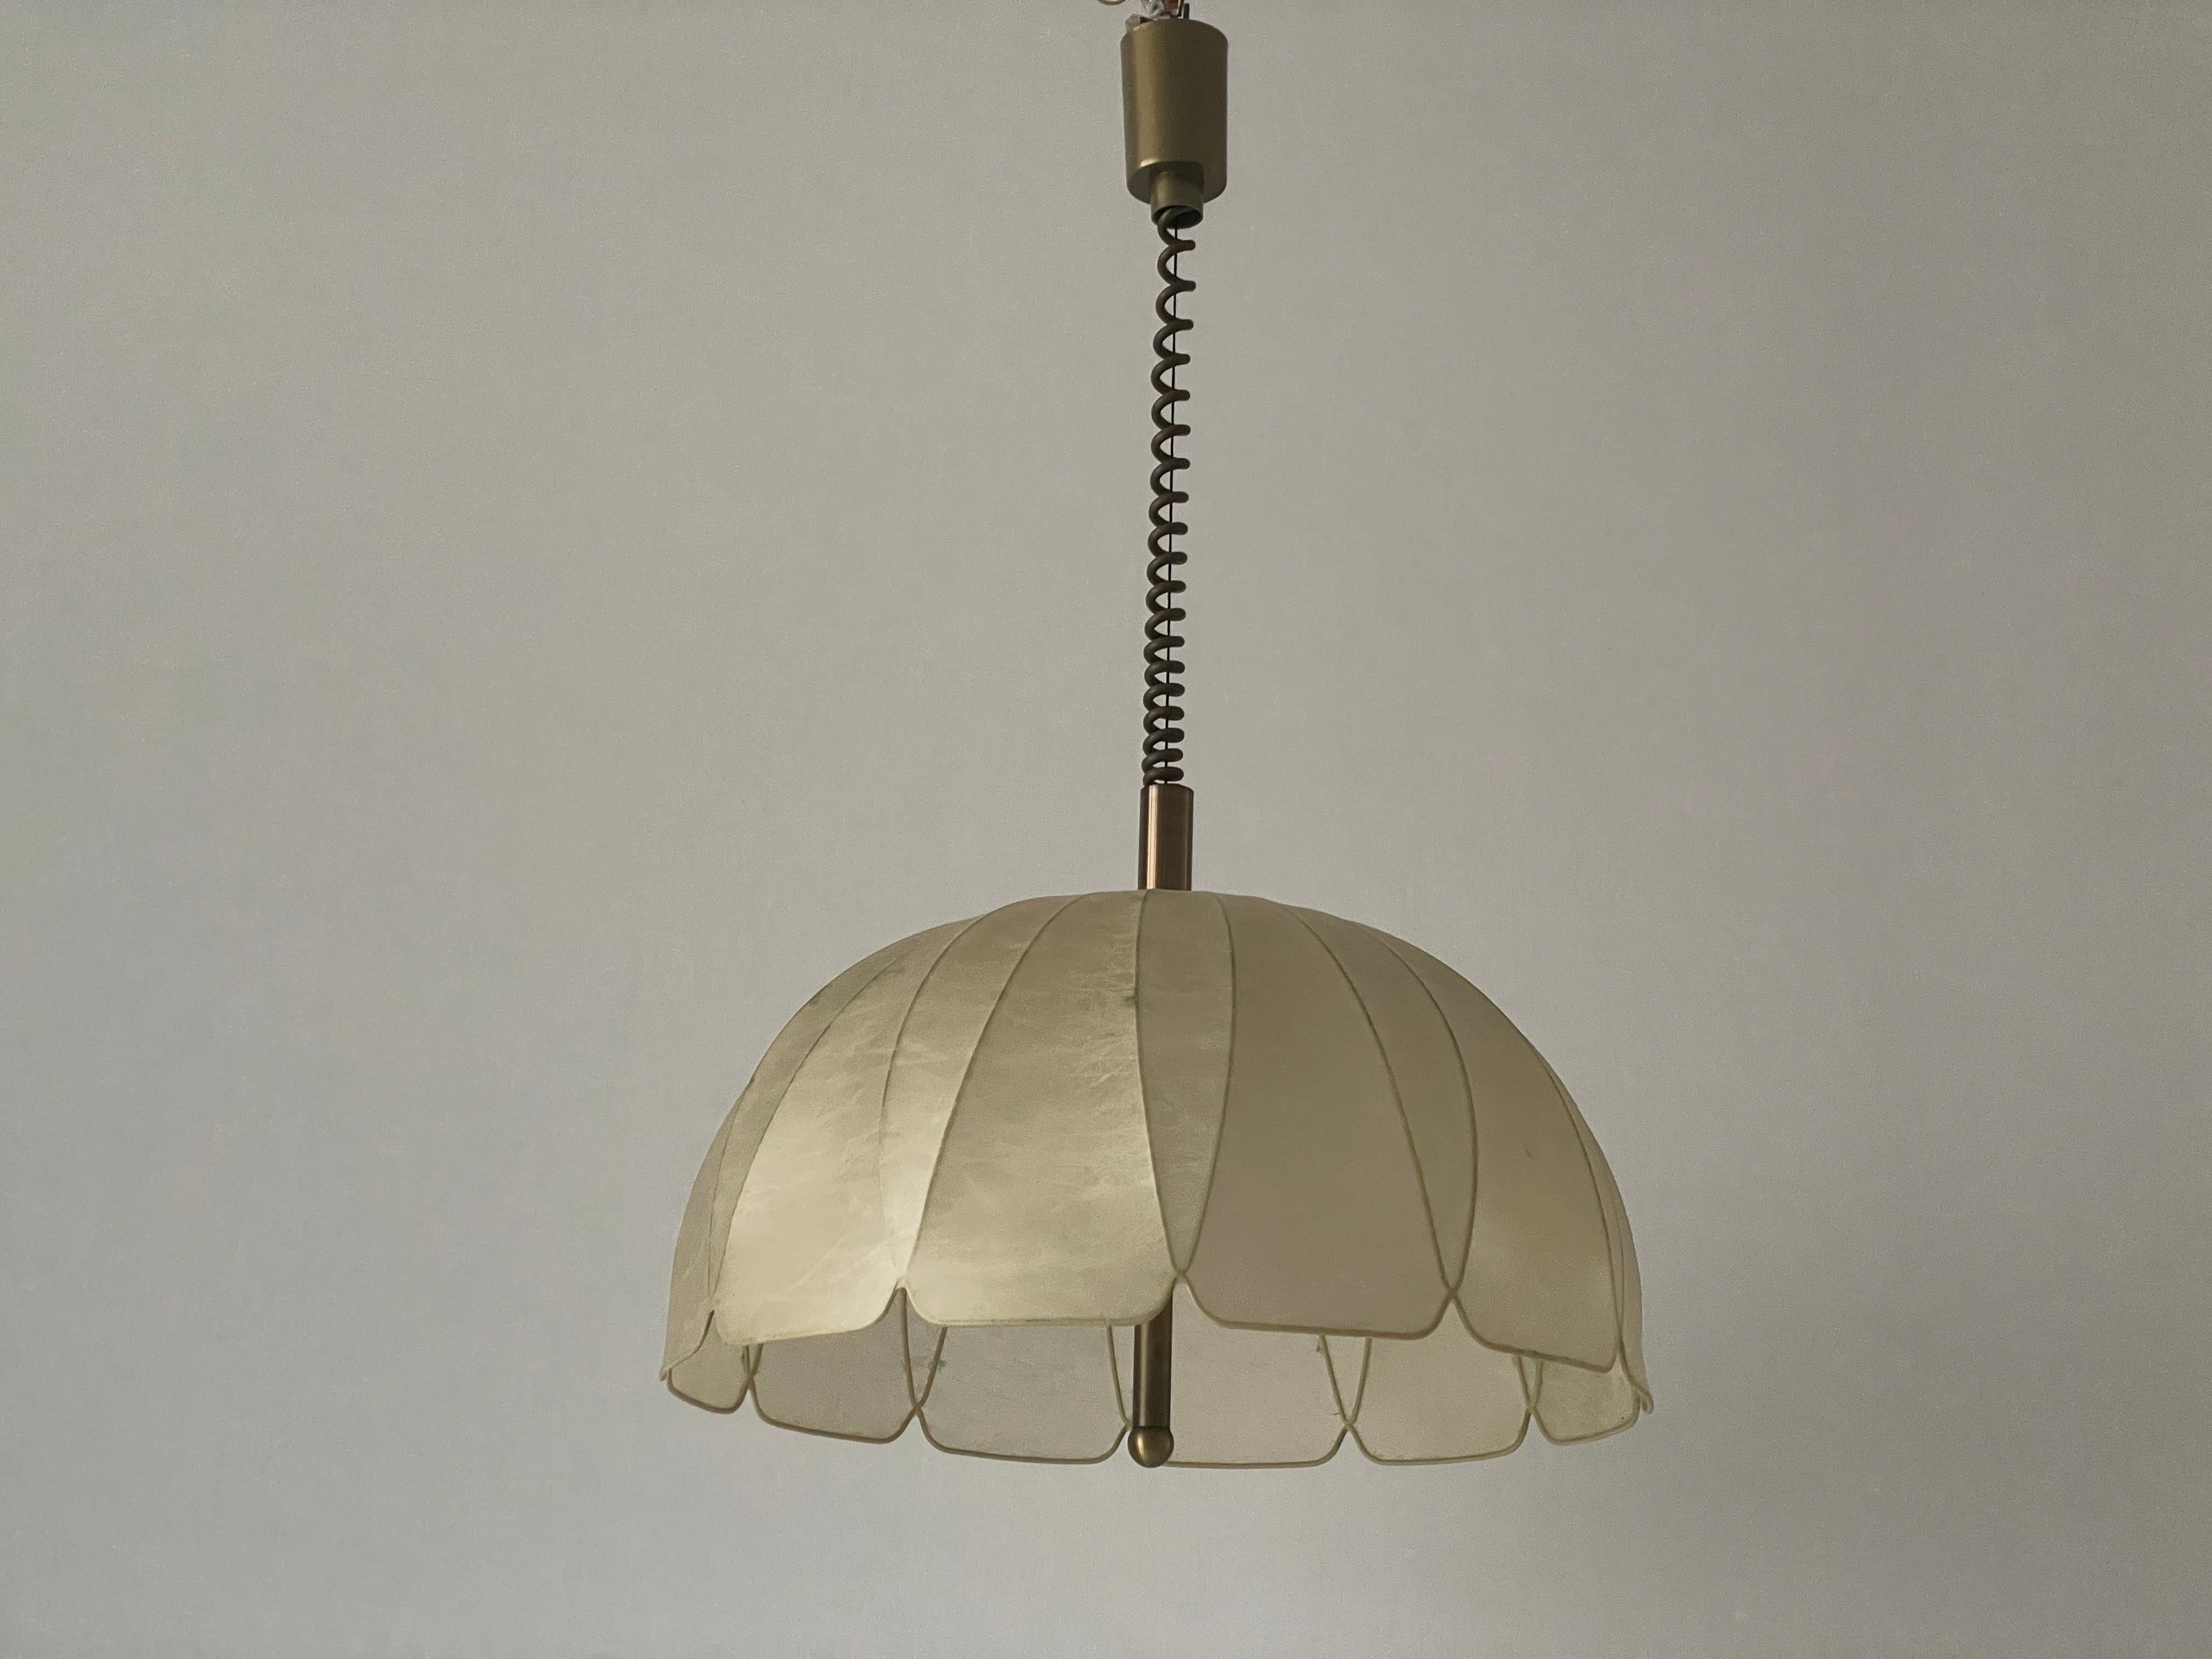 Resin Flower Design Cocoon Adjustable Height Pendant Lamp by Goldkant, 1960s, Germany For Sale